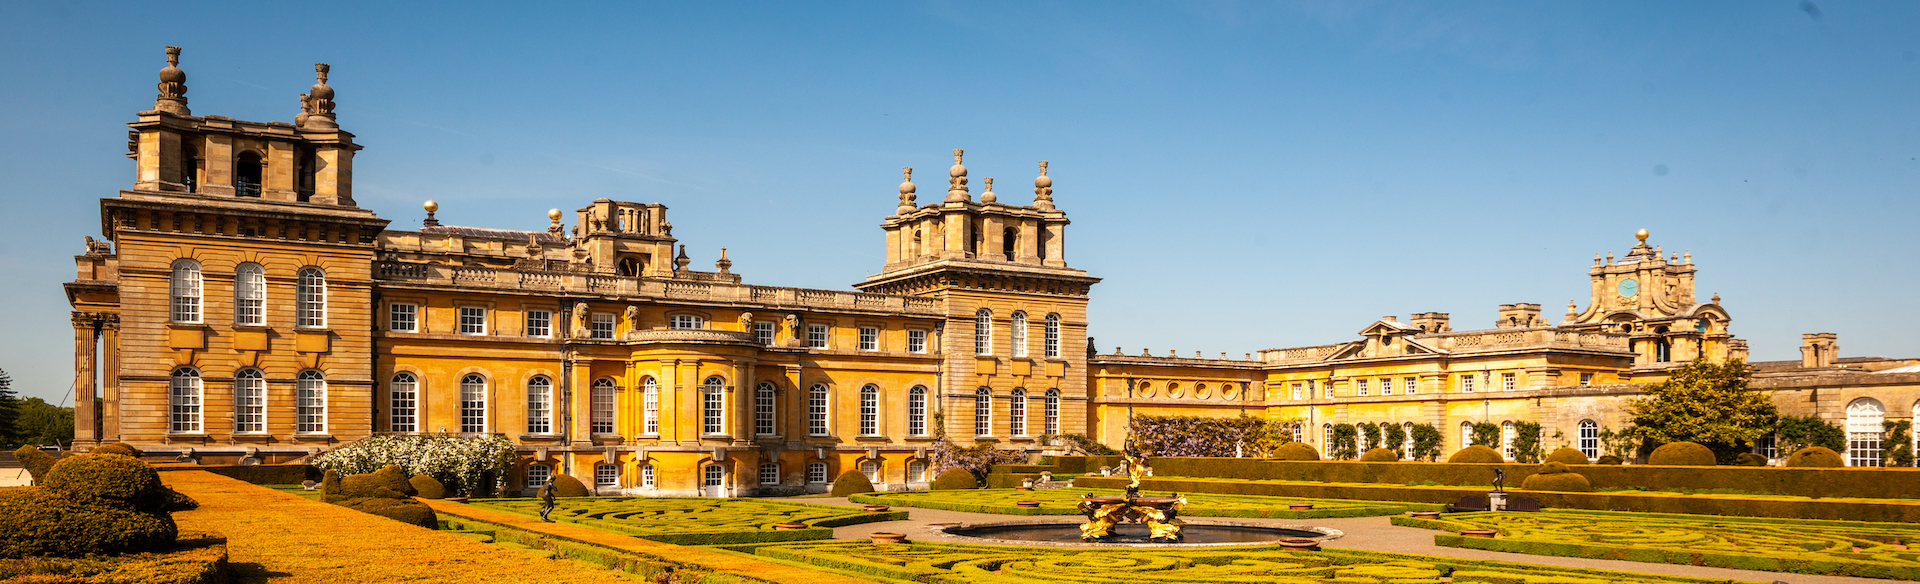 the grand sandstone structure of Blenheim Palace and it's luscious gardens under a blue sky